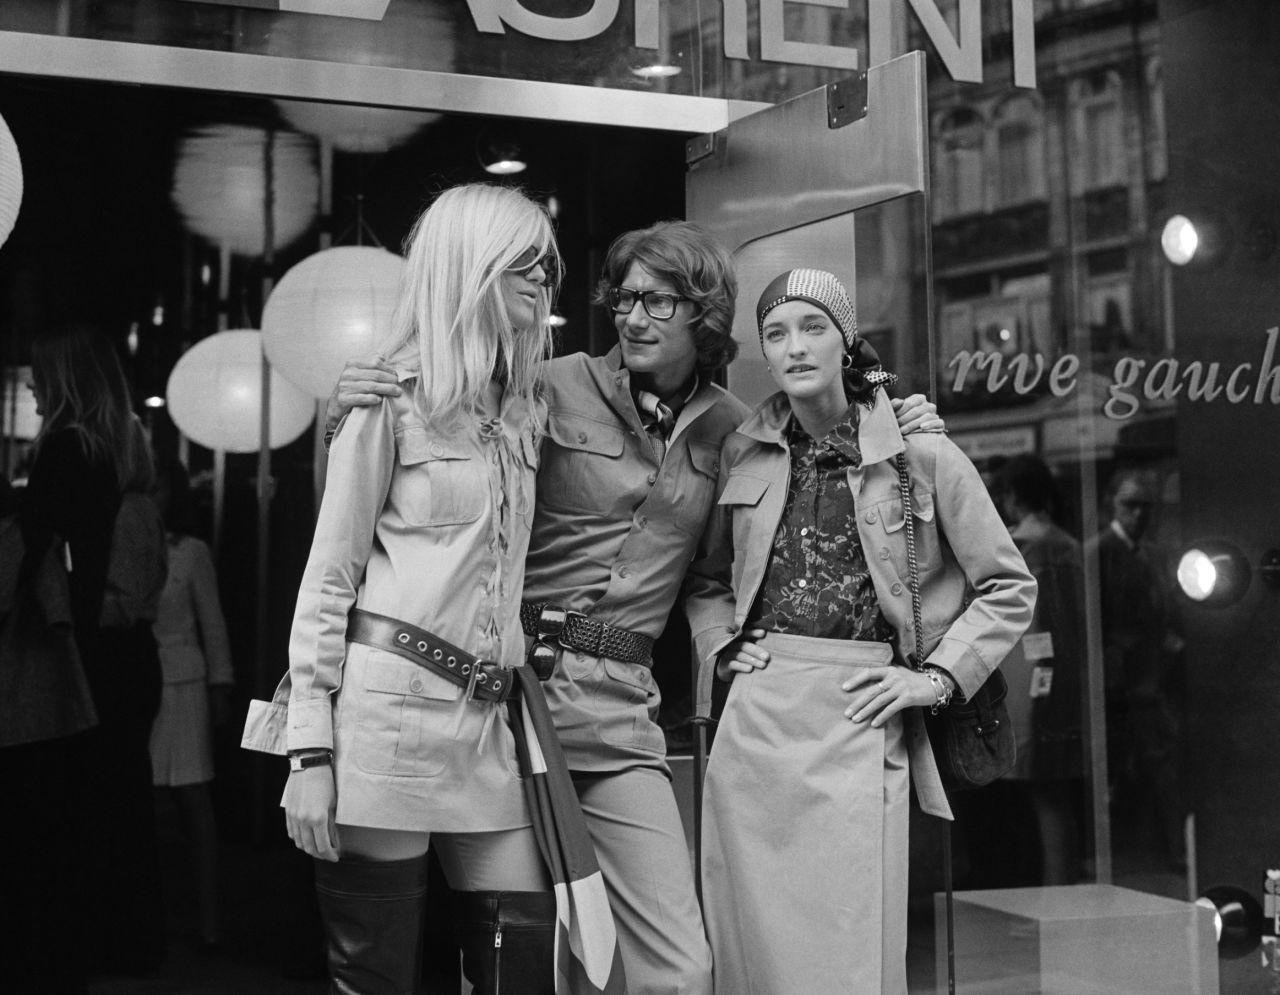 Yves Saint Laurent was at the creative helm of Christian Dior before branching out to start his own eponymous label in 1960. (Pictured: Yves Saint with friends and muses Betty Catroux and Loulou de la Falaise outside of his Paris Rive Gauche shop, 1969)